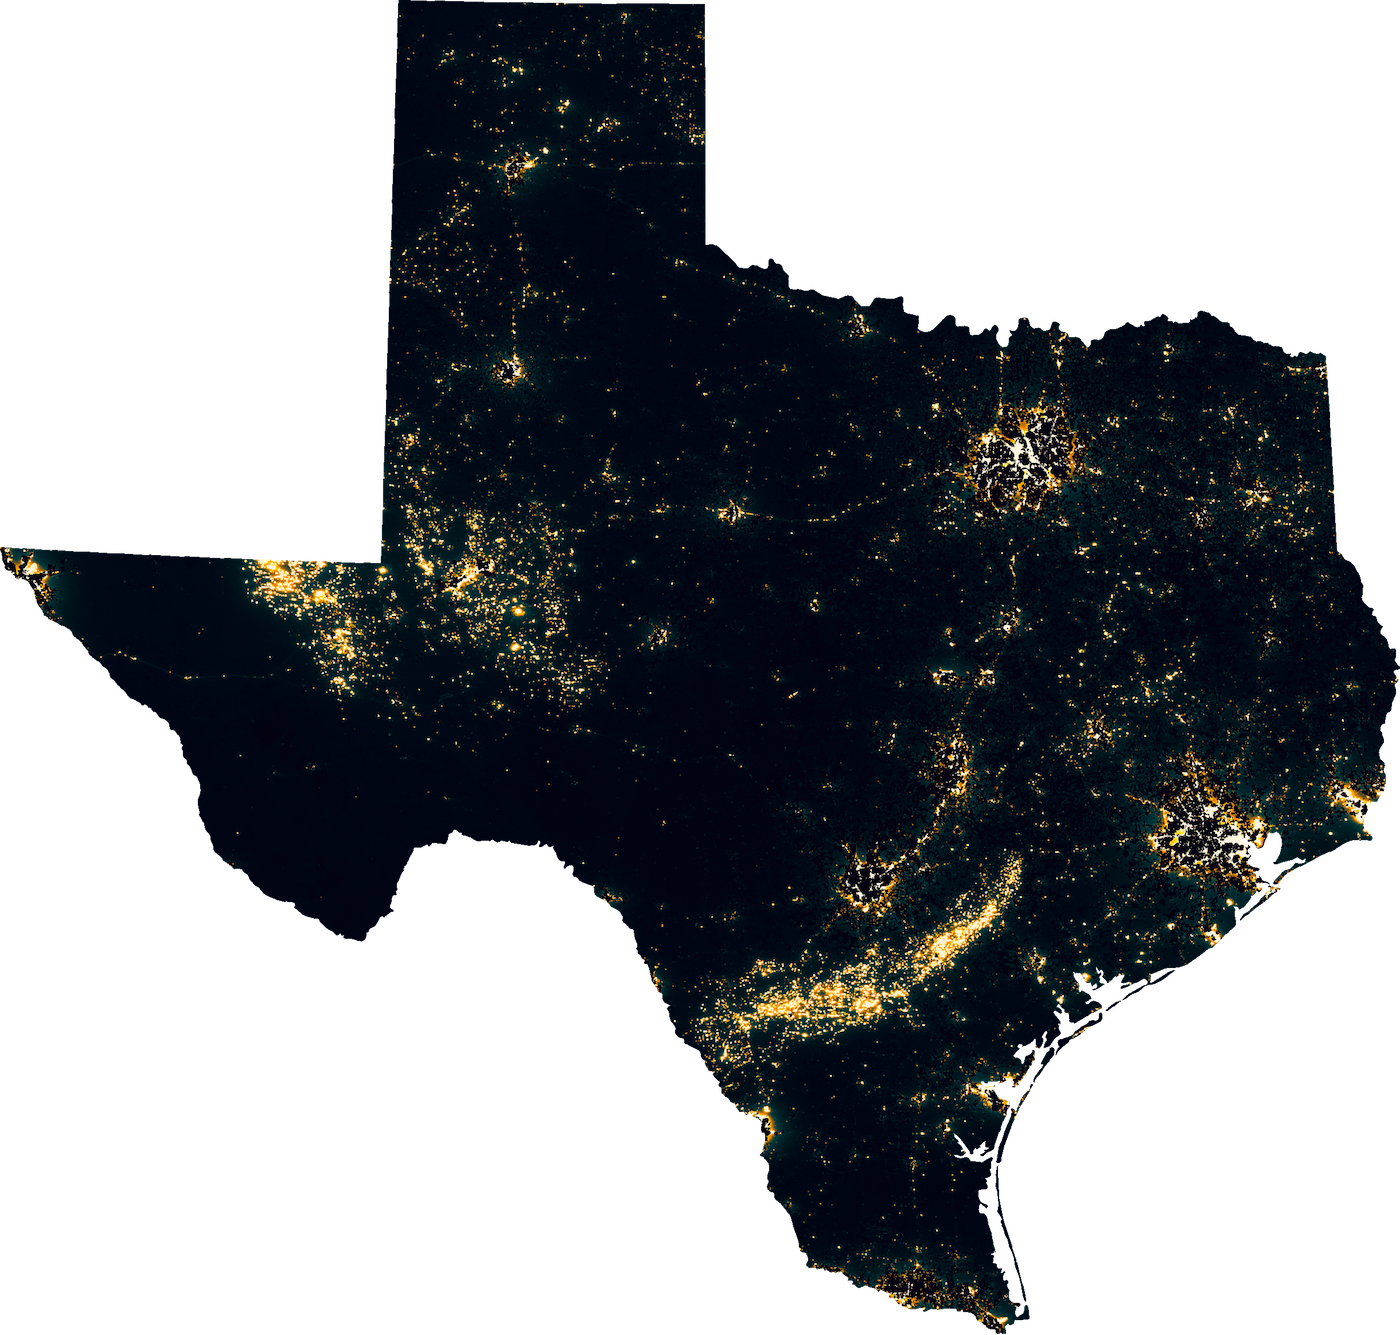 Tim Wallace, Light Pollution Controlled for Population, Texas